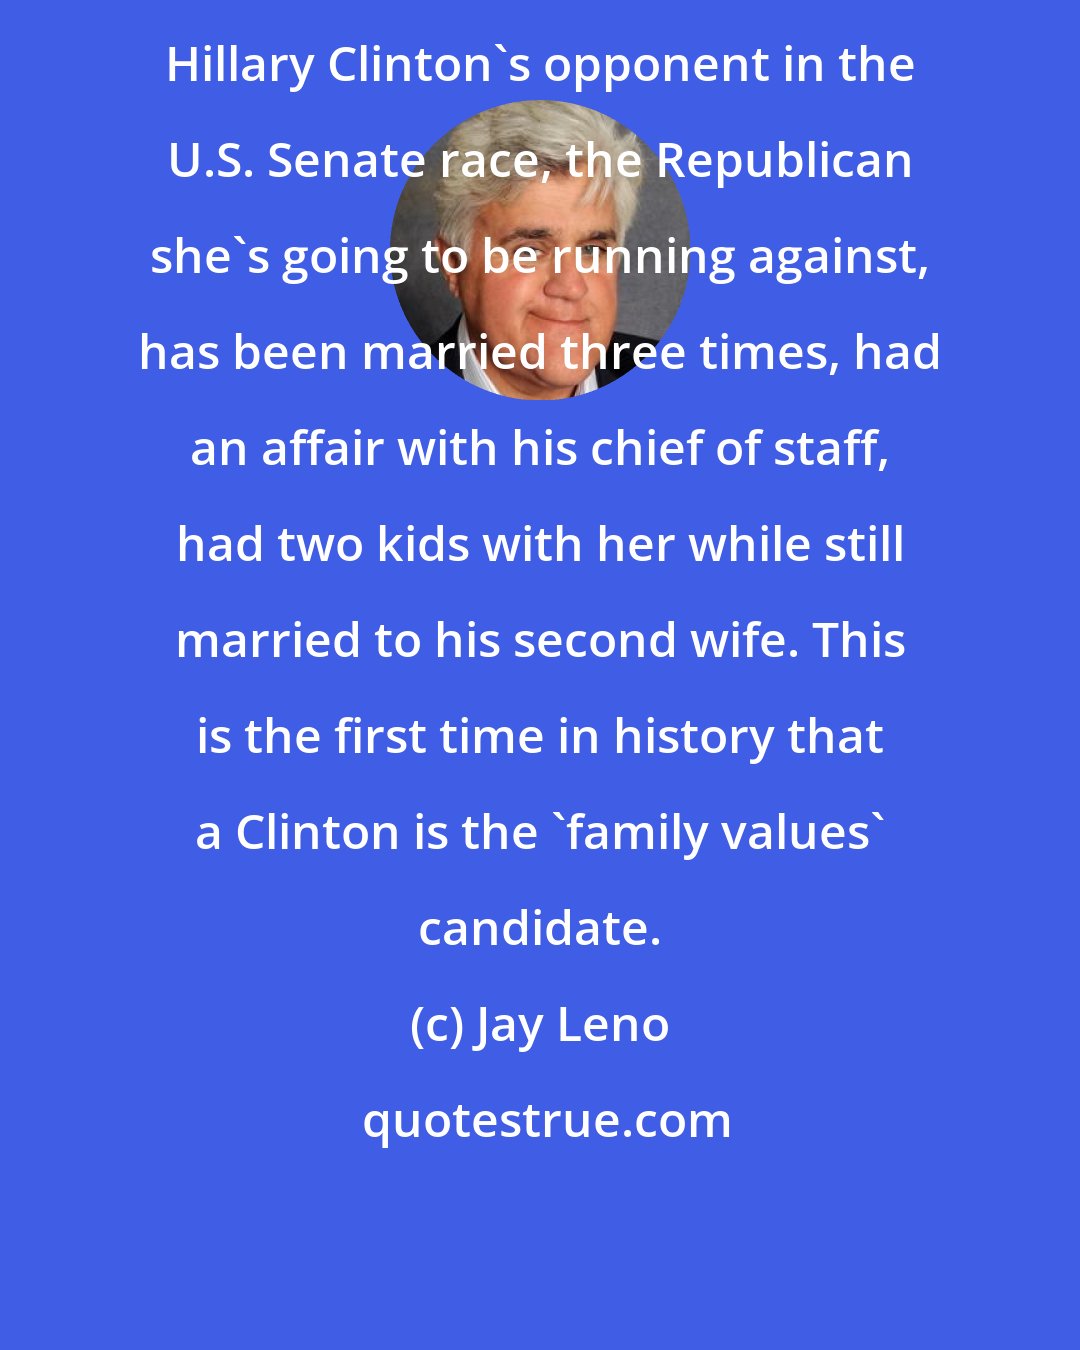 Jay Leno: Hillary Clinton's opponent in the U.S. Senate race, the Republican she's going to be running against, has been married three times, had an affair with his chief of staff, had two kids with her while still married to his second wife. This is the first time in history that a Clinton is the 'family values' candidate.